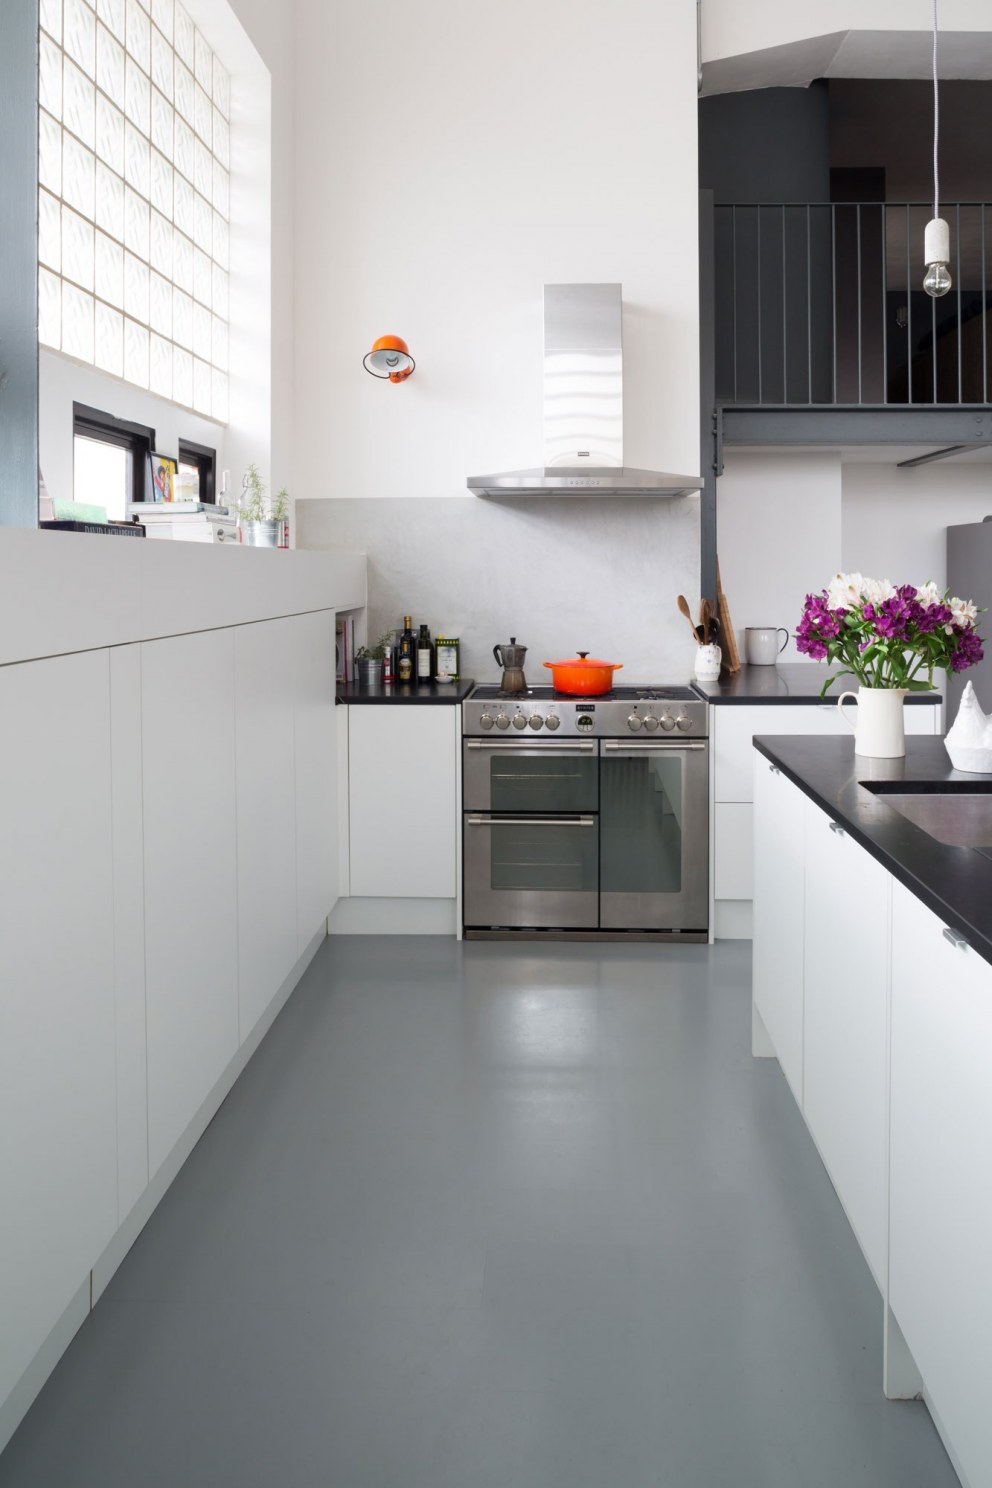 Dehavilland Studios, East London | View of kitchen cabinets and oven | Interior Designers